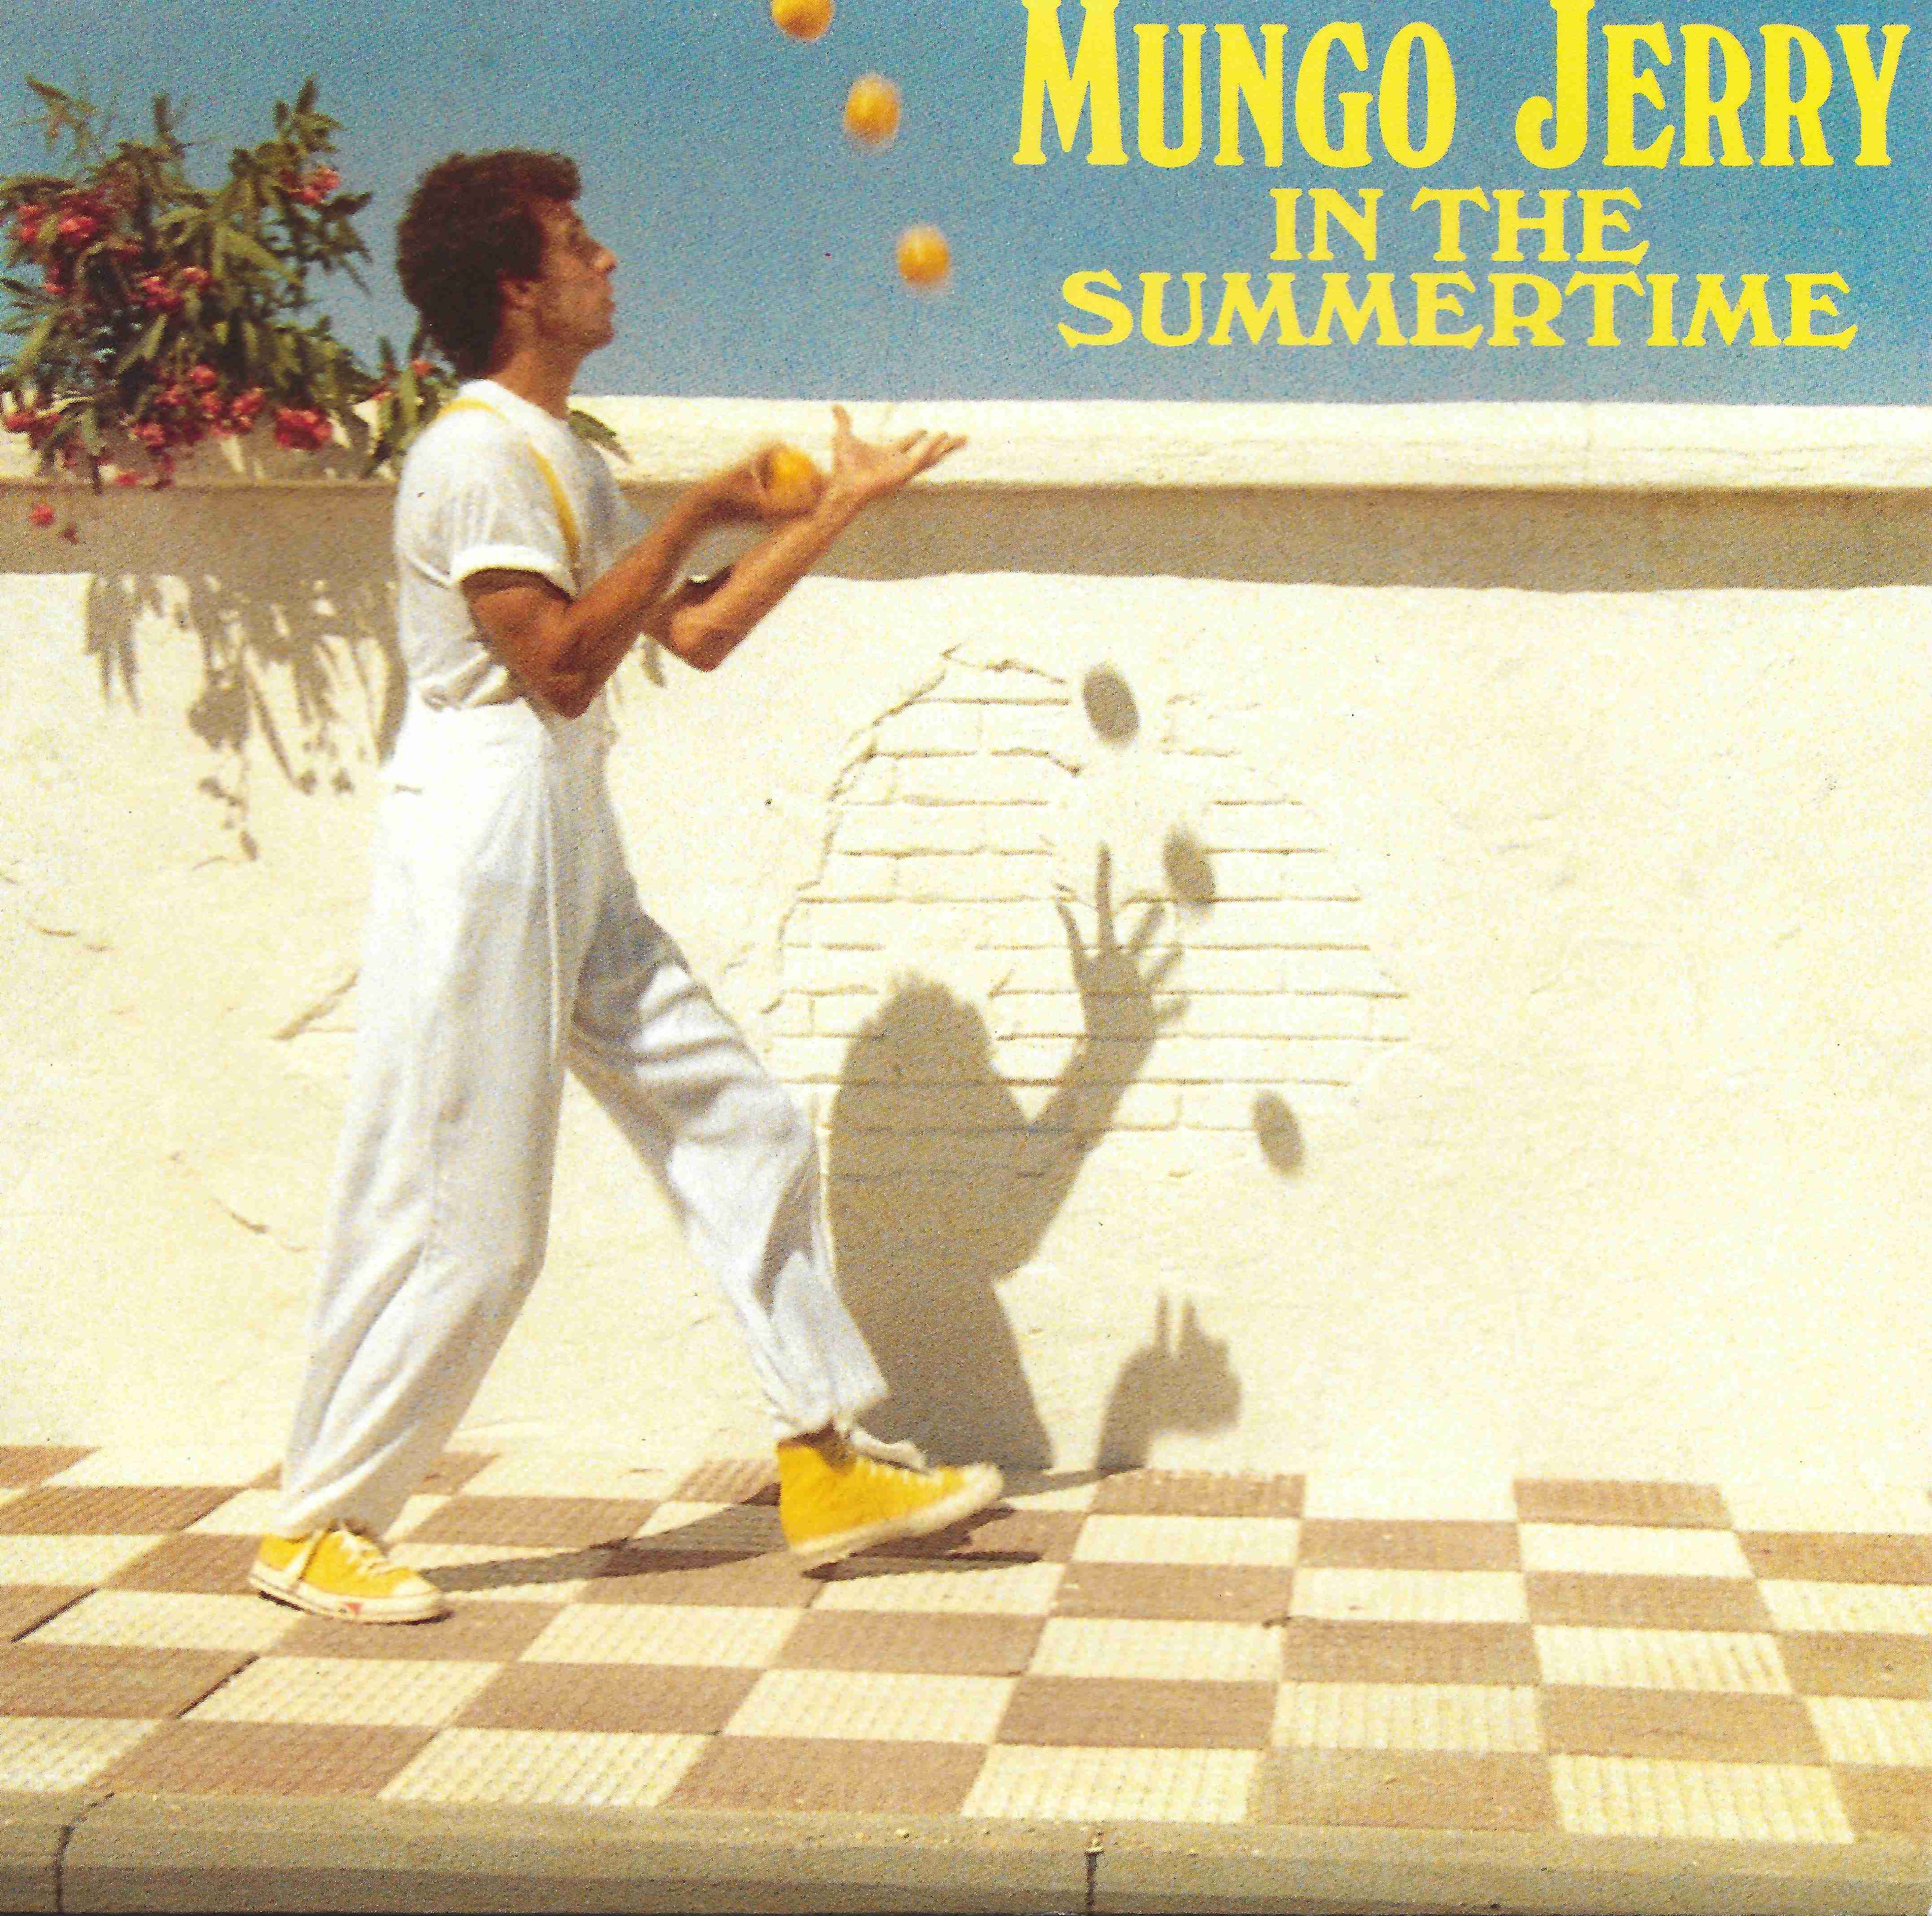 Picture of RESL 825 In the summertime by artist Mungo Jerry from the BBC records and Tapes library